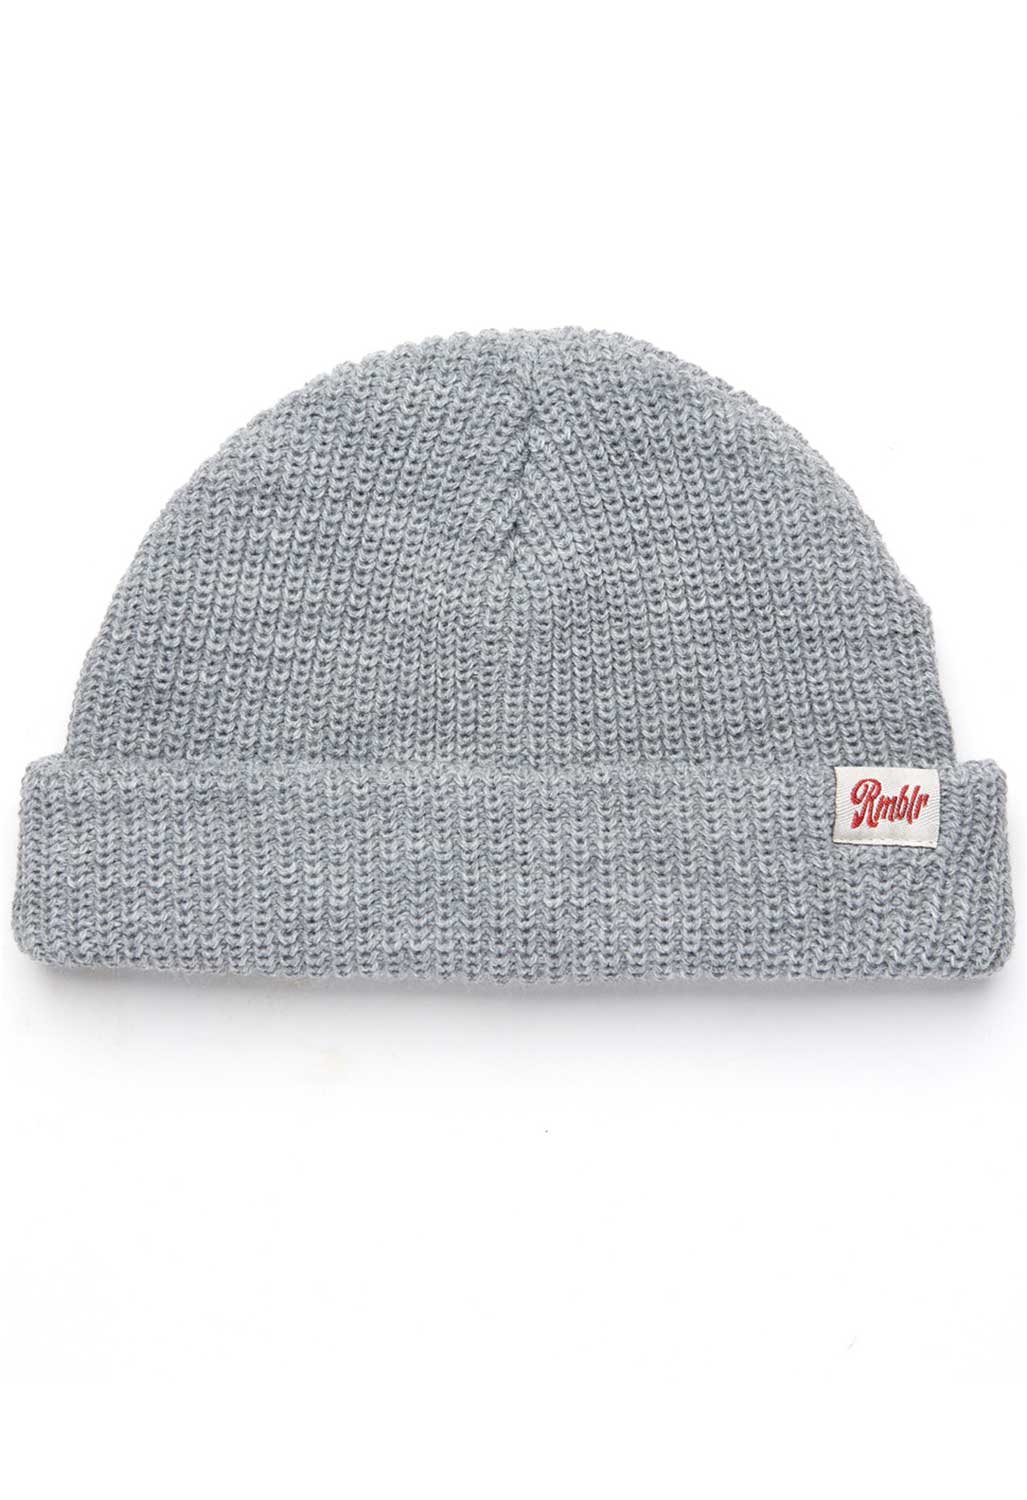 Product image of RMBLR Smithy Beanie